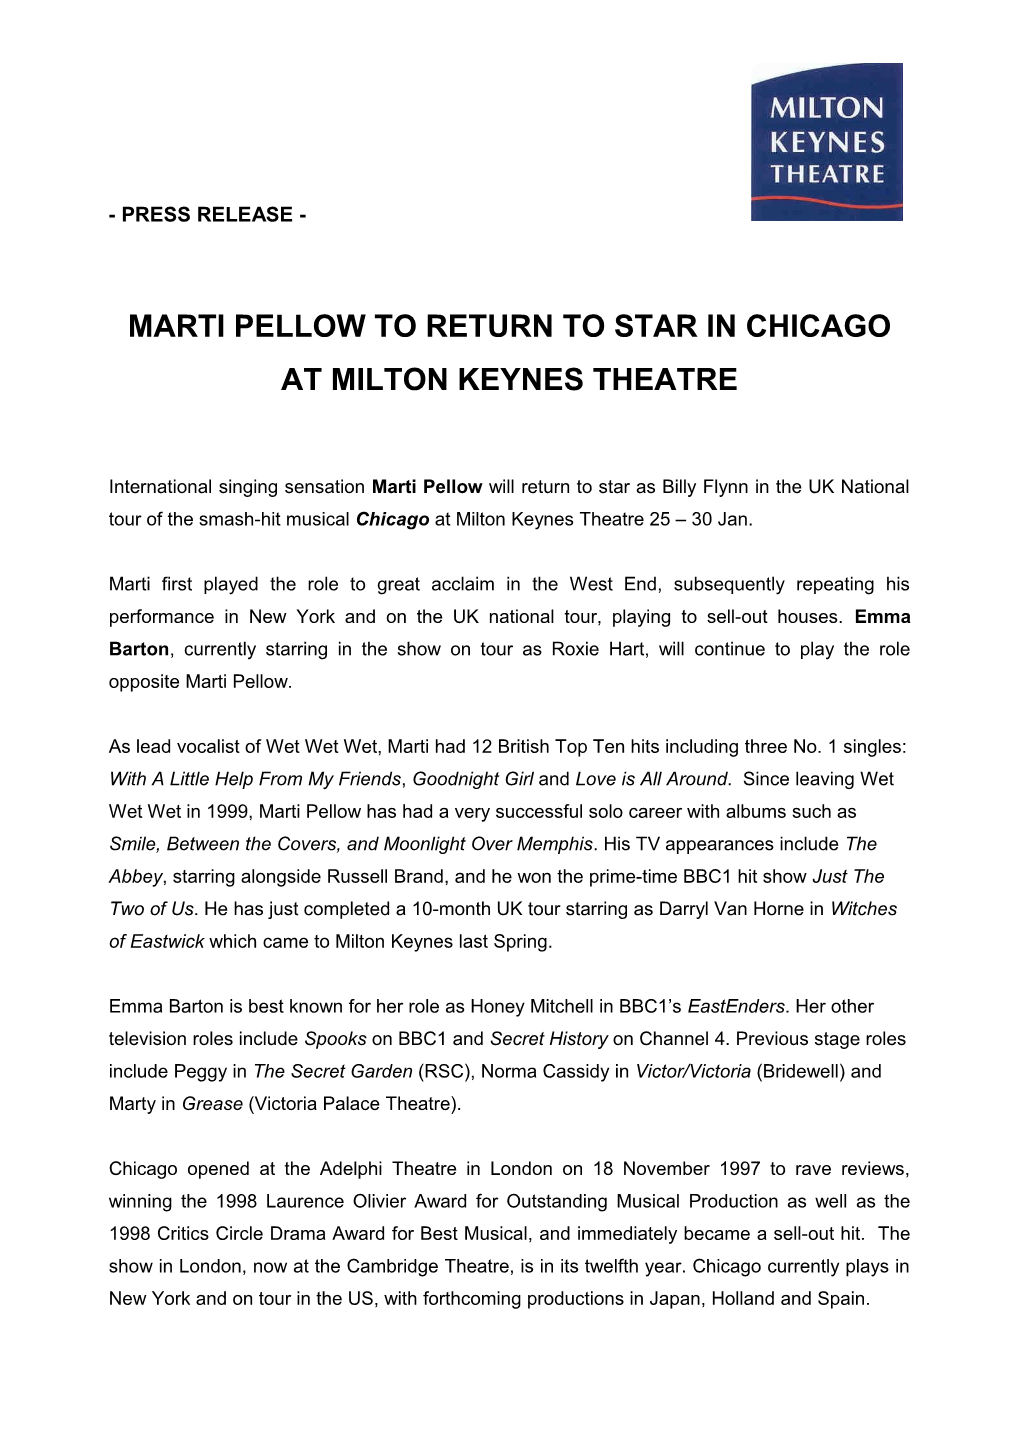 Marti Pellow to Return to Star in Chicago